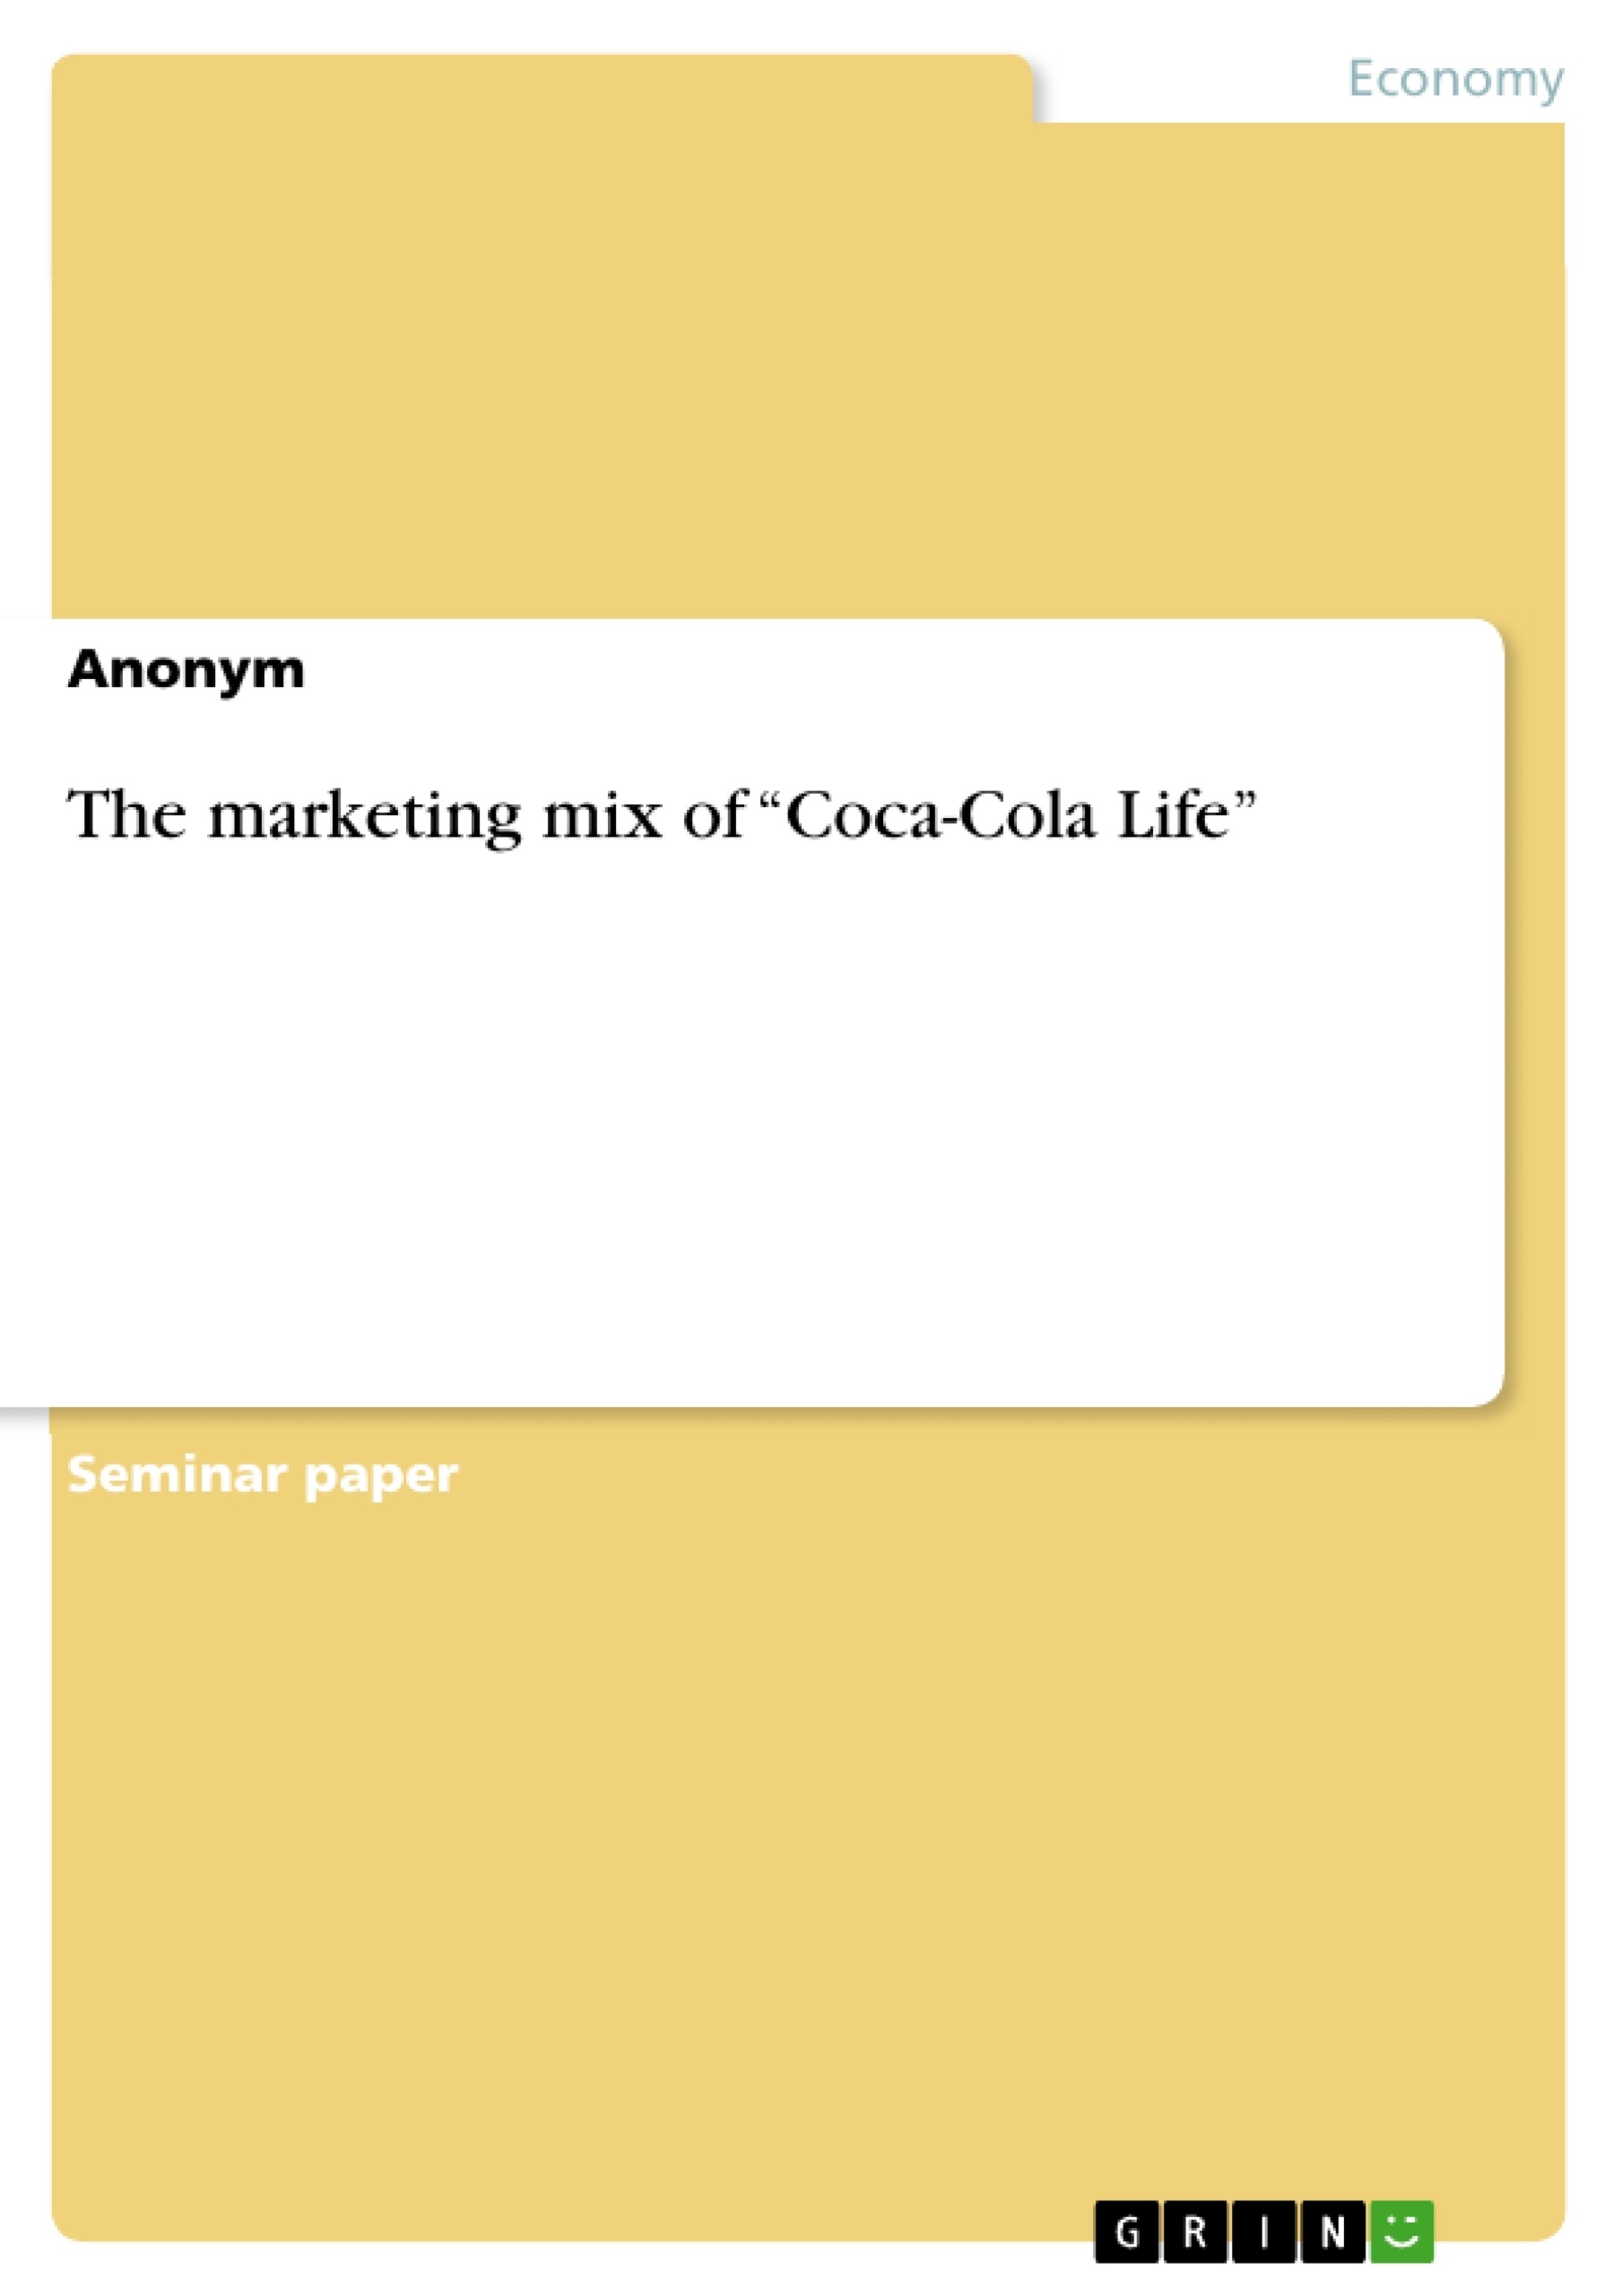 Title: The marketing mix of “Coca-Cola Life”